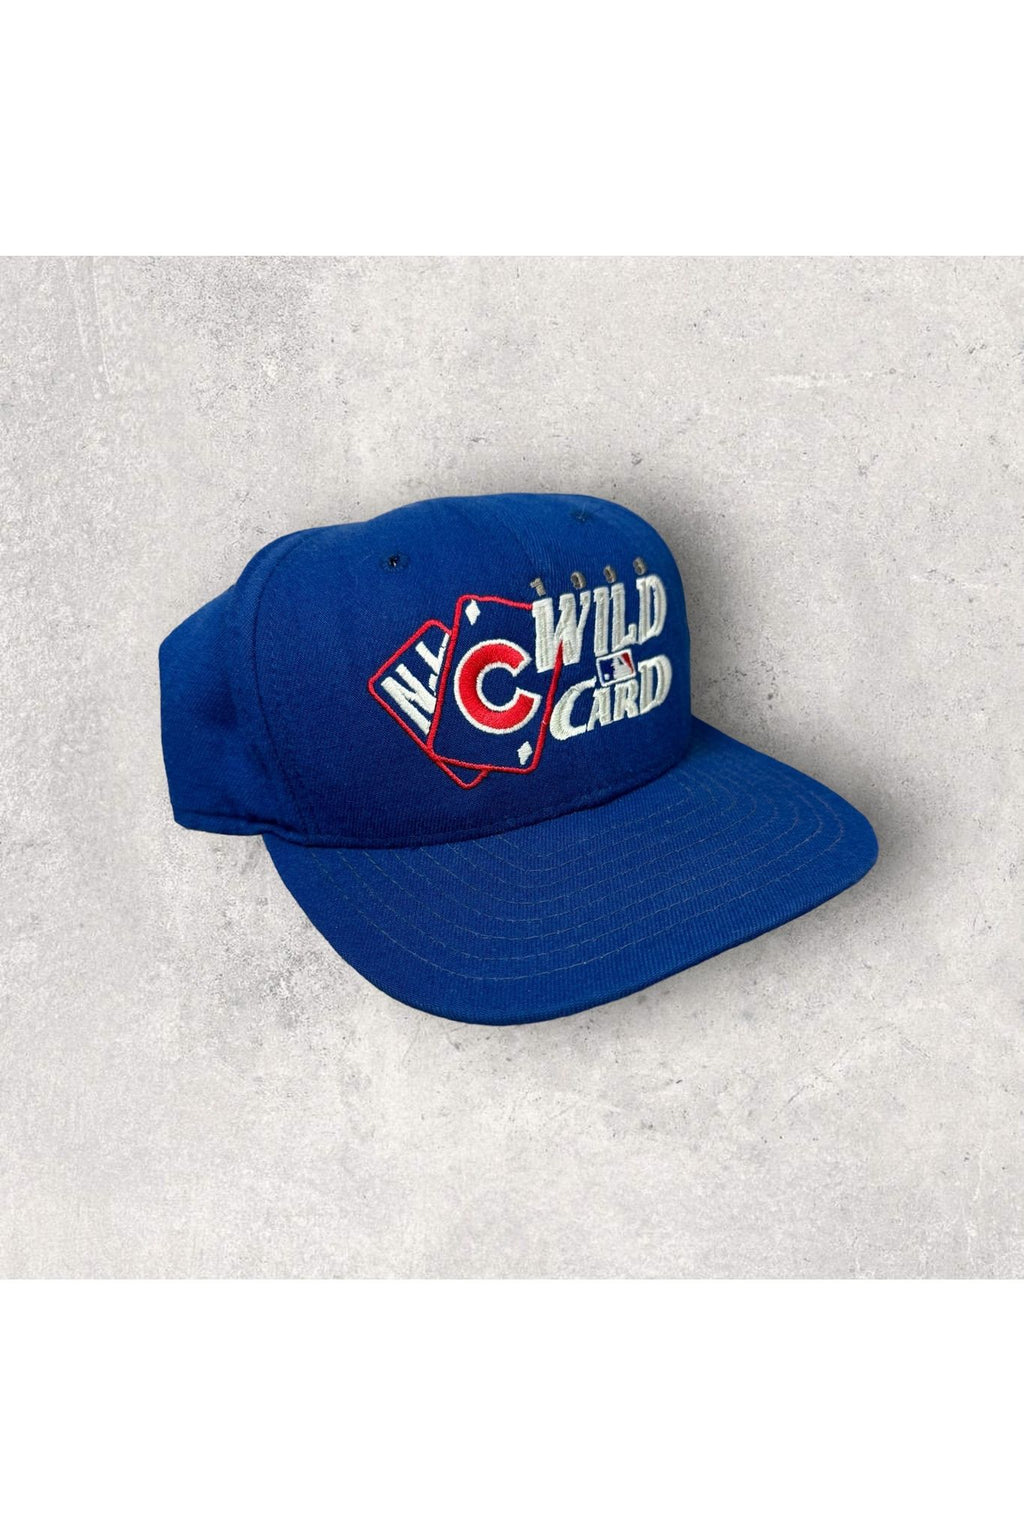 Vintage New Era Made In USA 1998 Chicago Cubs N.L. Wild Card Snapback